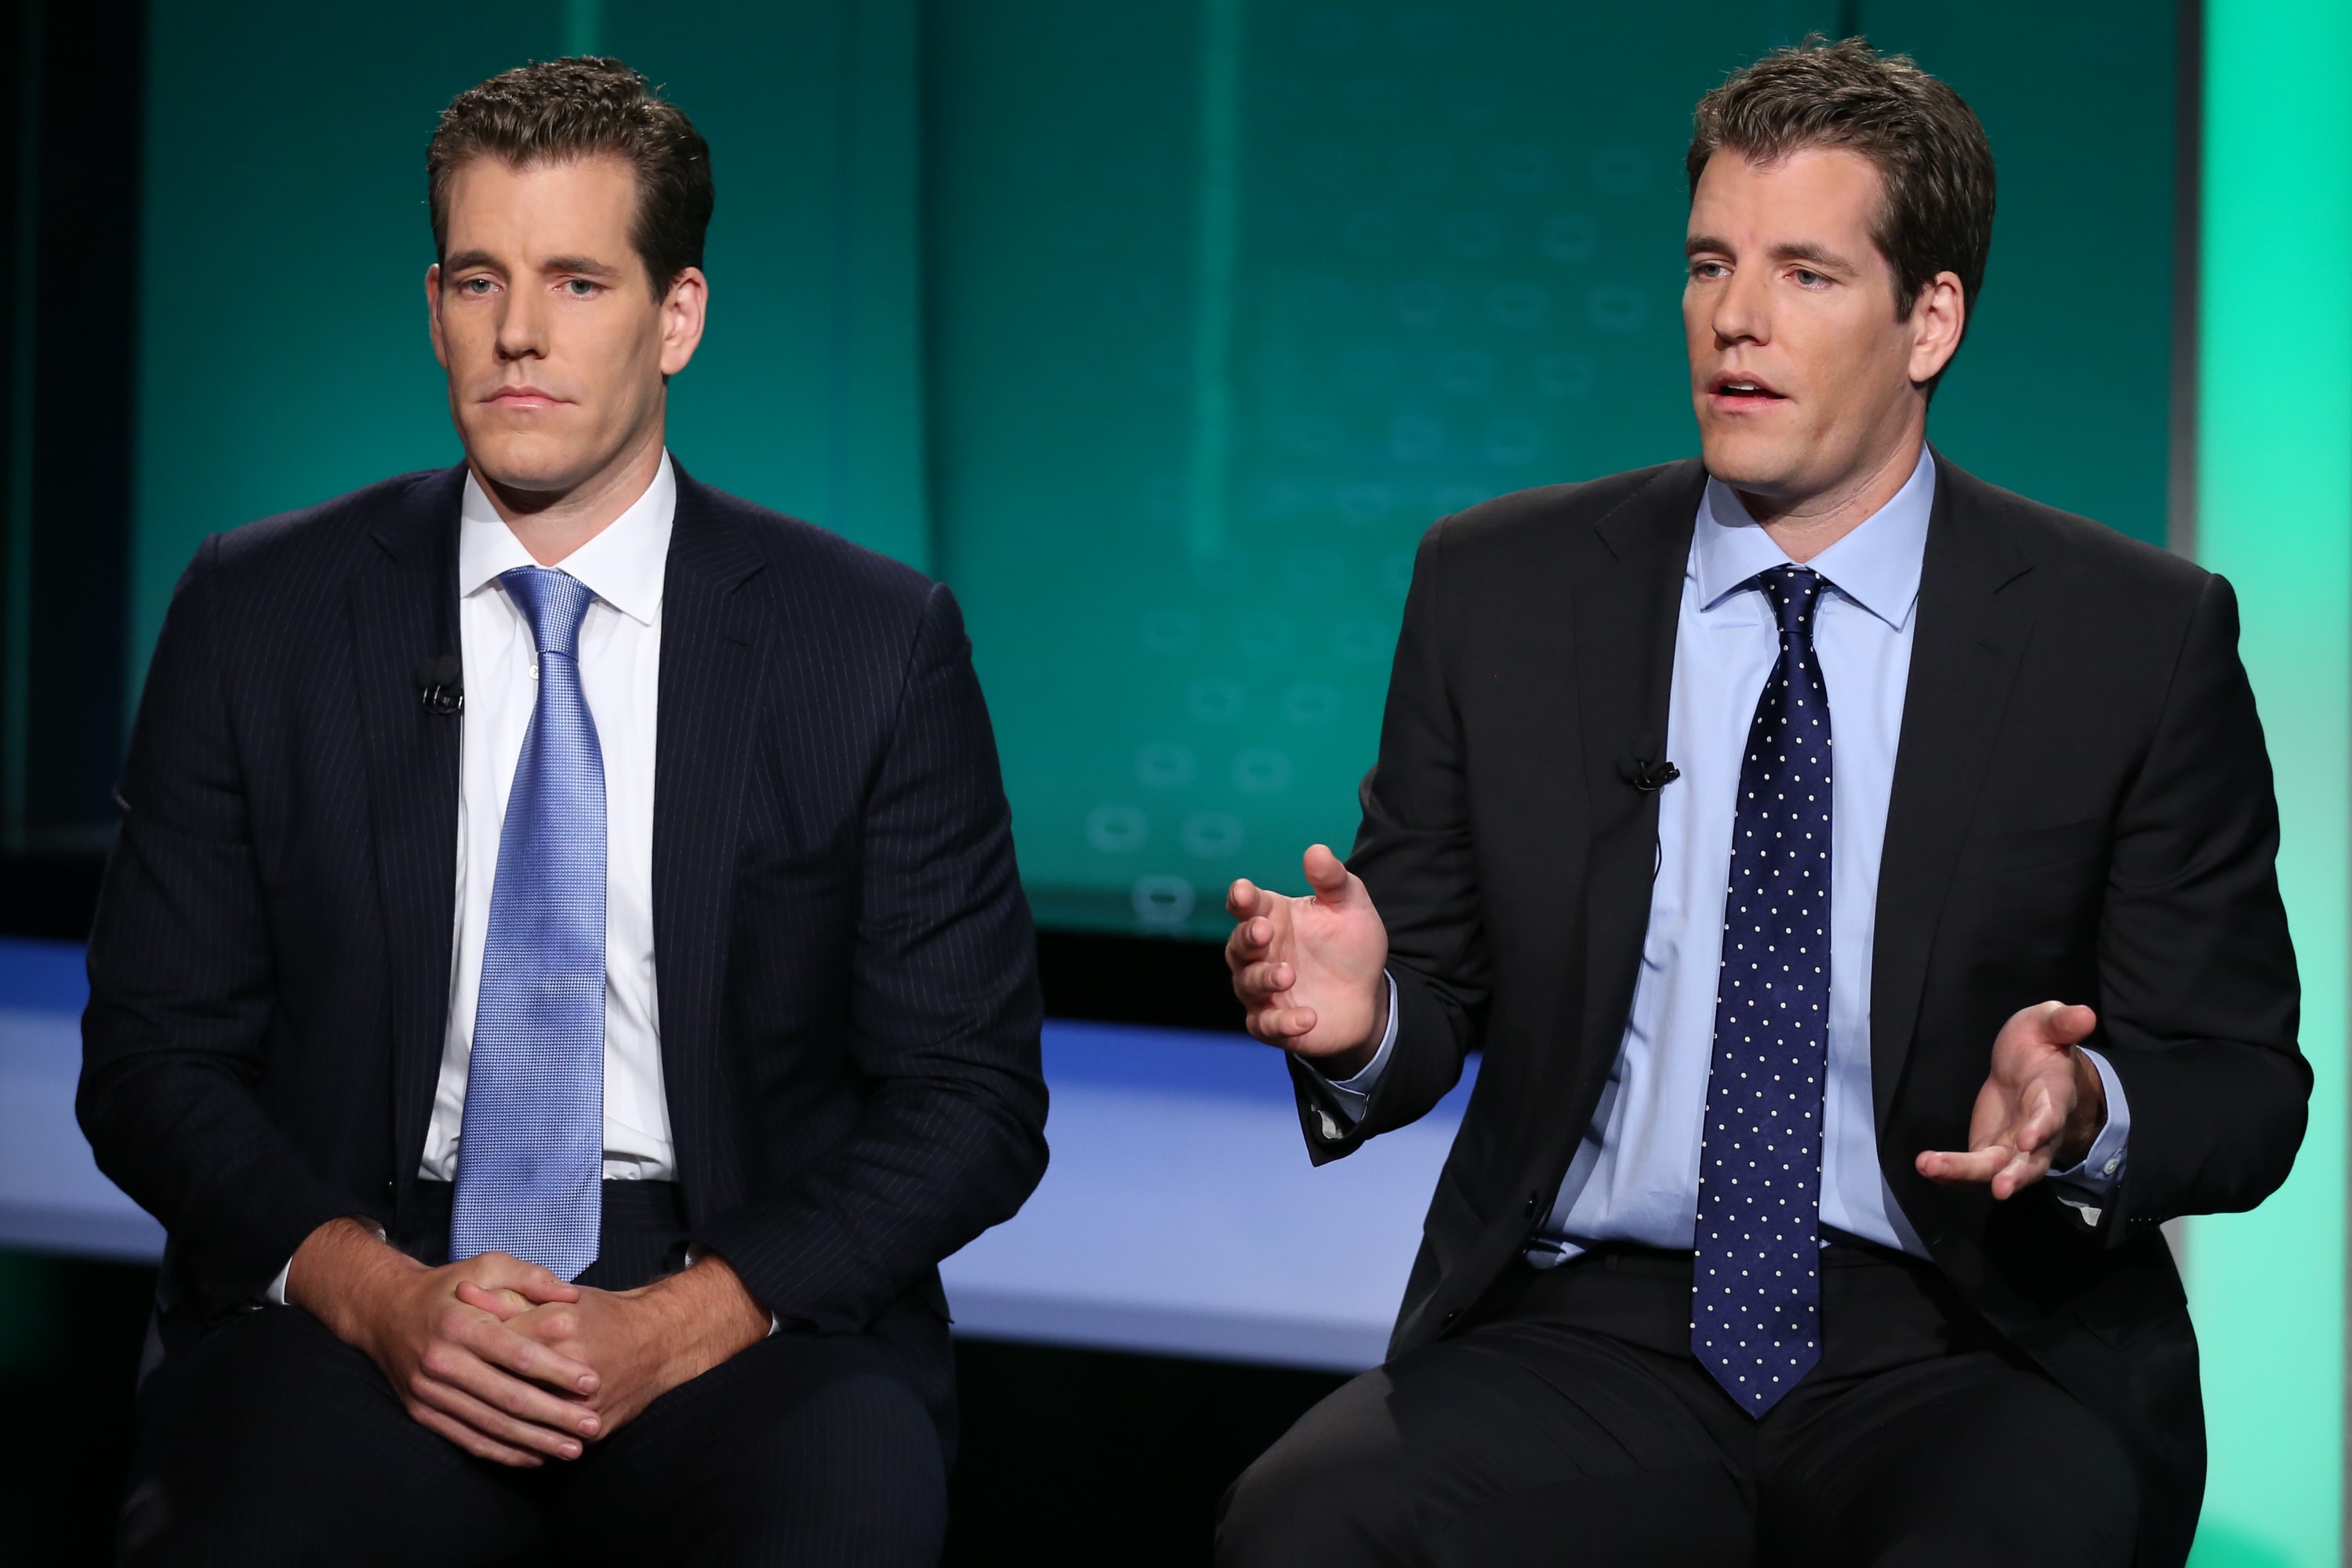 Cameron Winklevoss said Libra is a step in crypto adoption